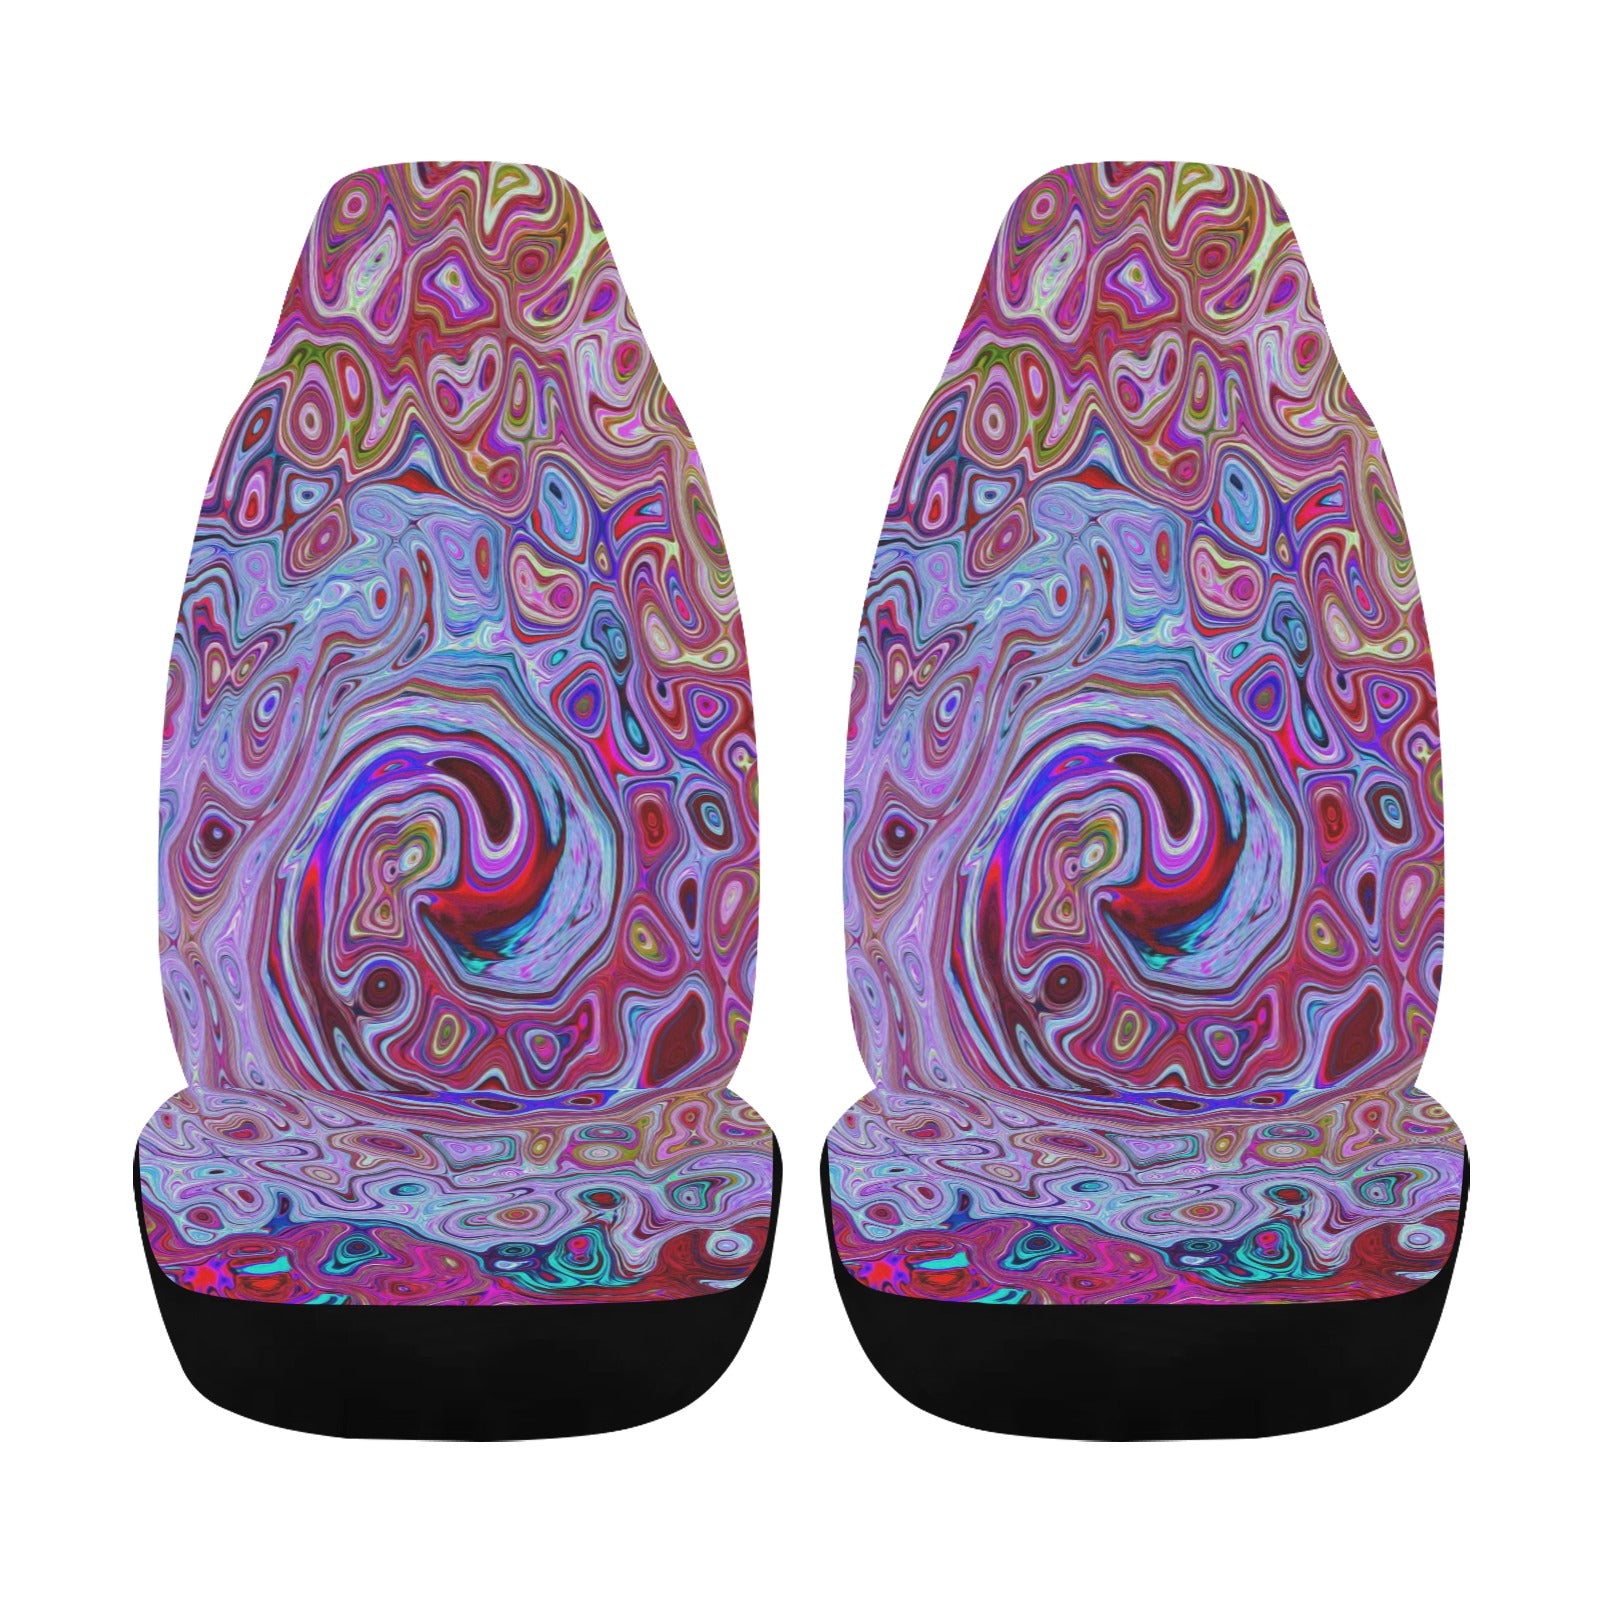 Car Seat Covers, Retro Groovy Abstract Lavender and Magenta Swirl